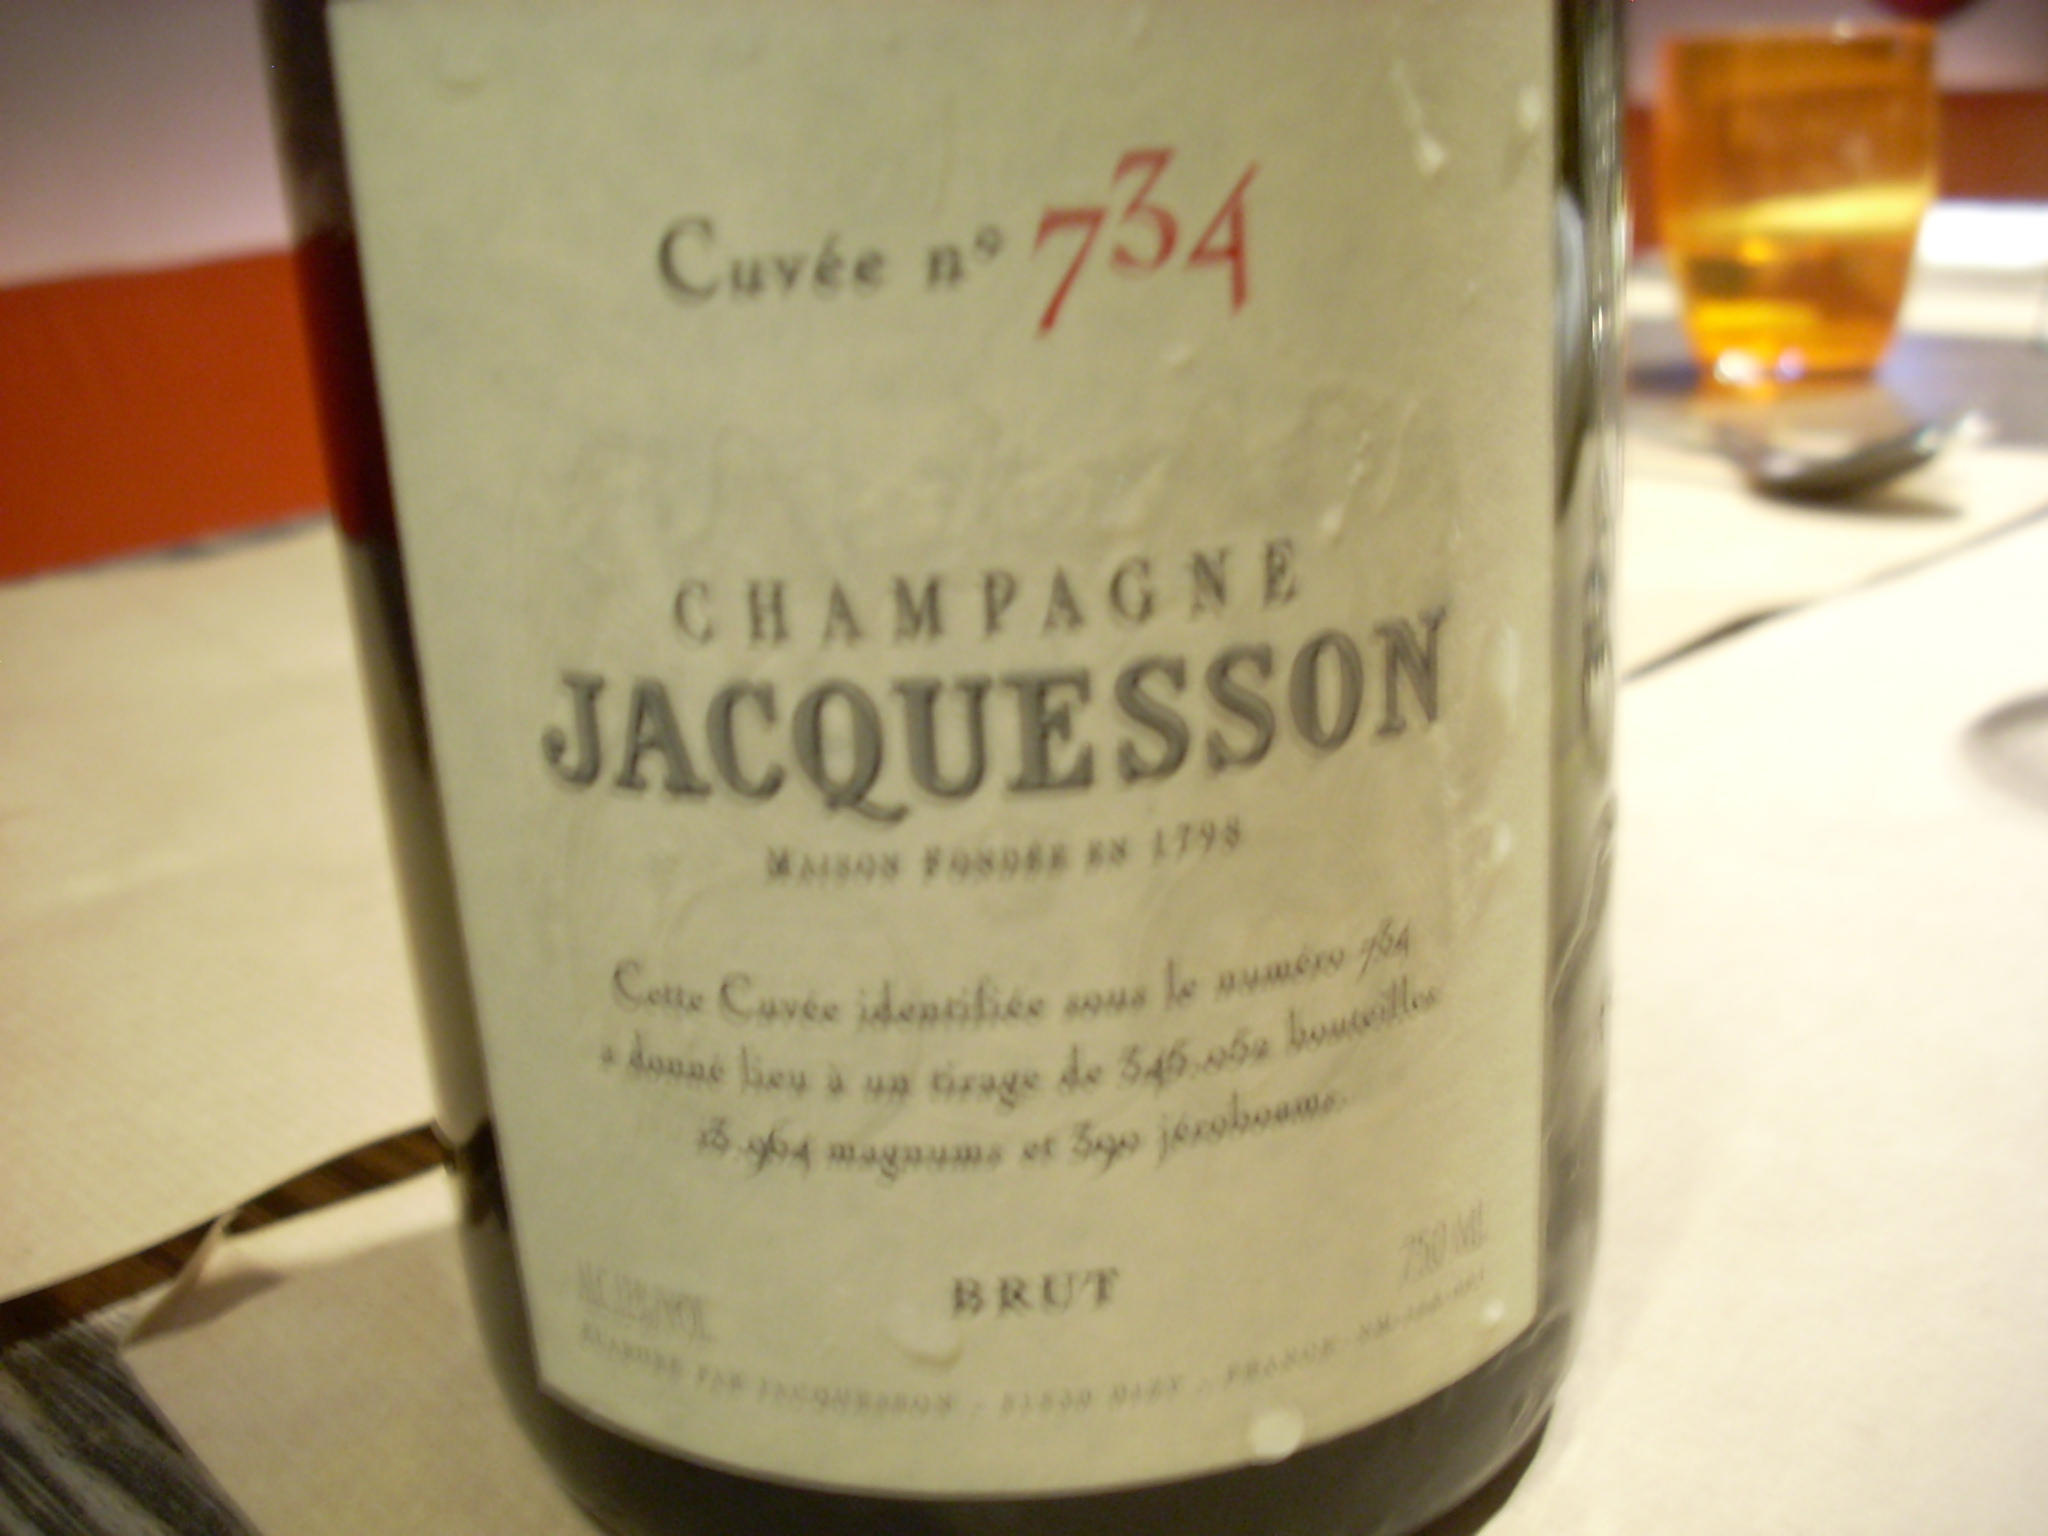 a glass with wine in it and the label is labeled champagne de jacquesson